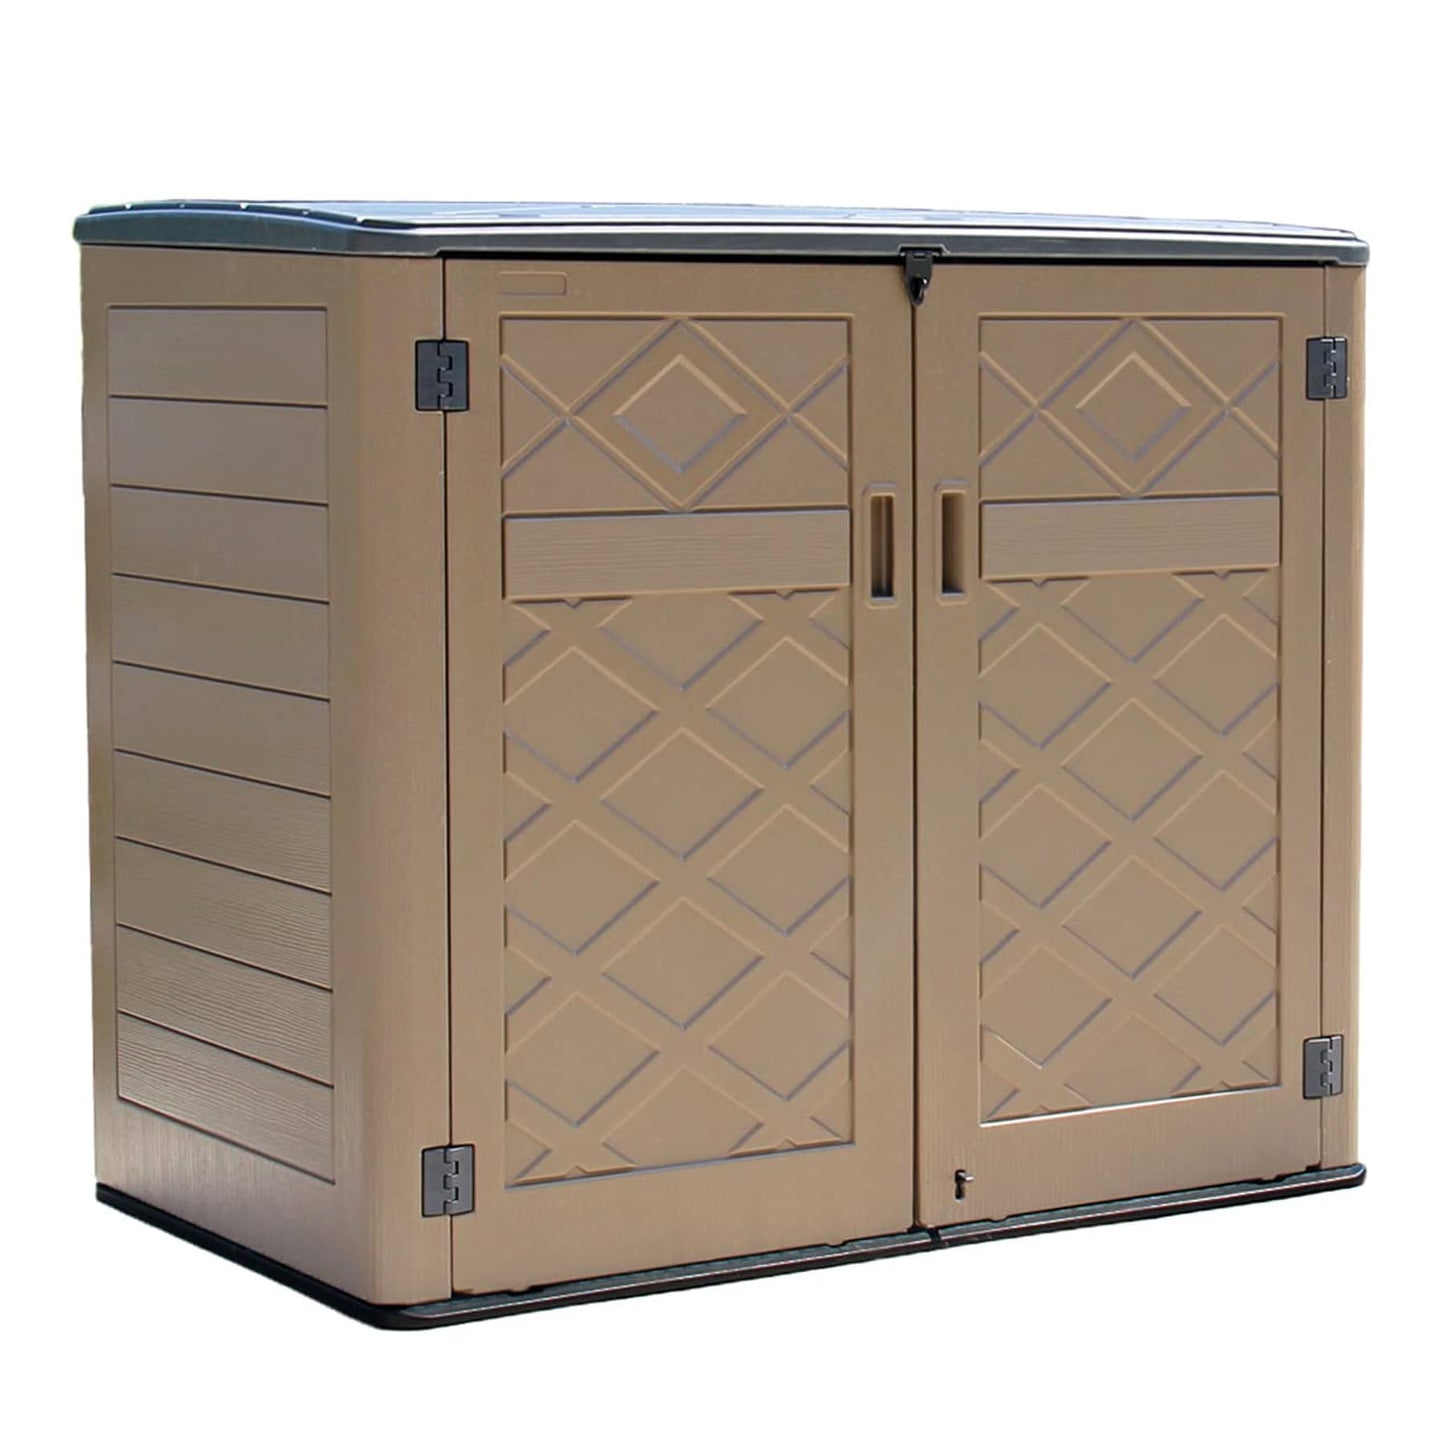 ADDOK Horizontal Outdoor Storage Sheds,Large Resin Outdoor Storage Cabinet for Patio Furniture,Grill, Pool Toys and Gardening Tools.(48Cu.ft)